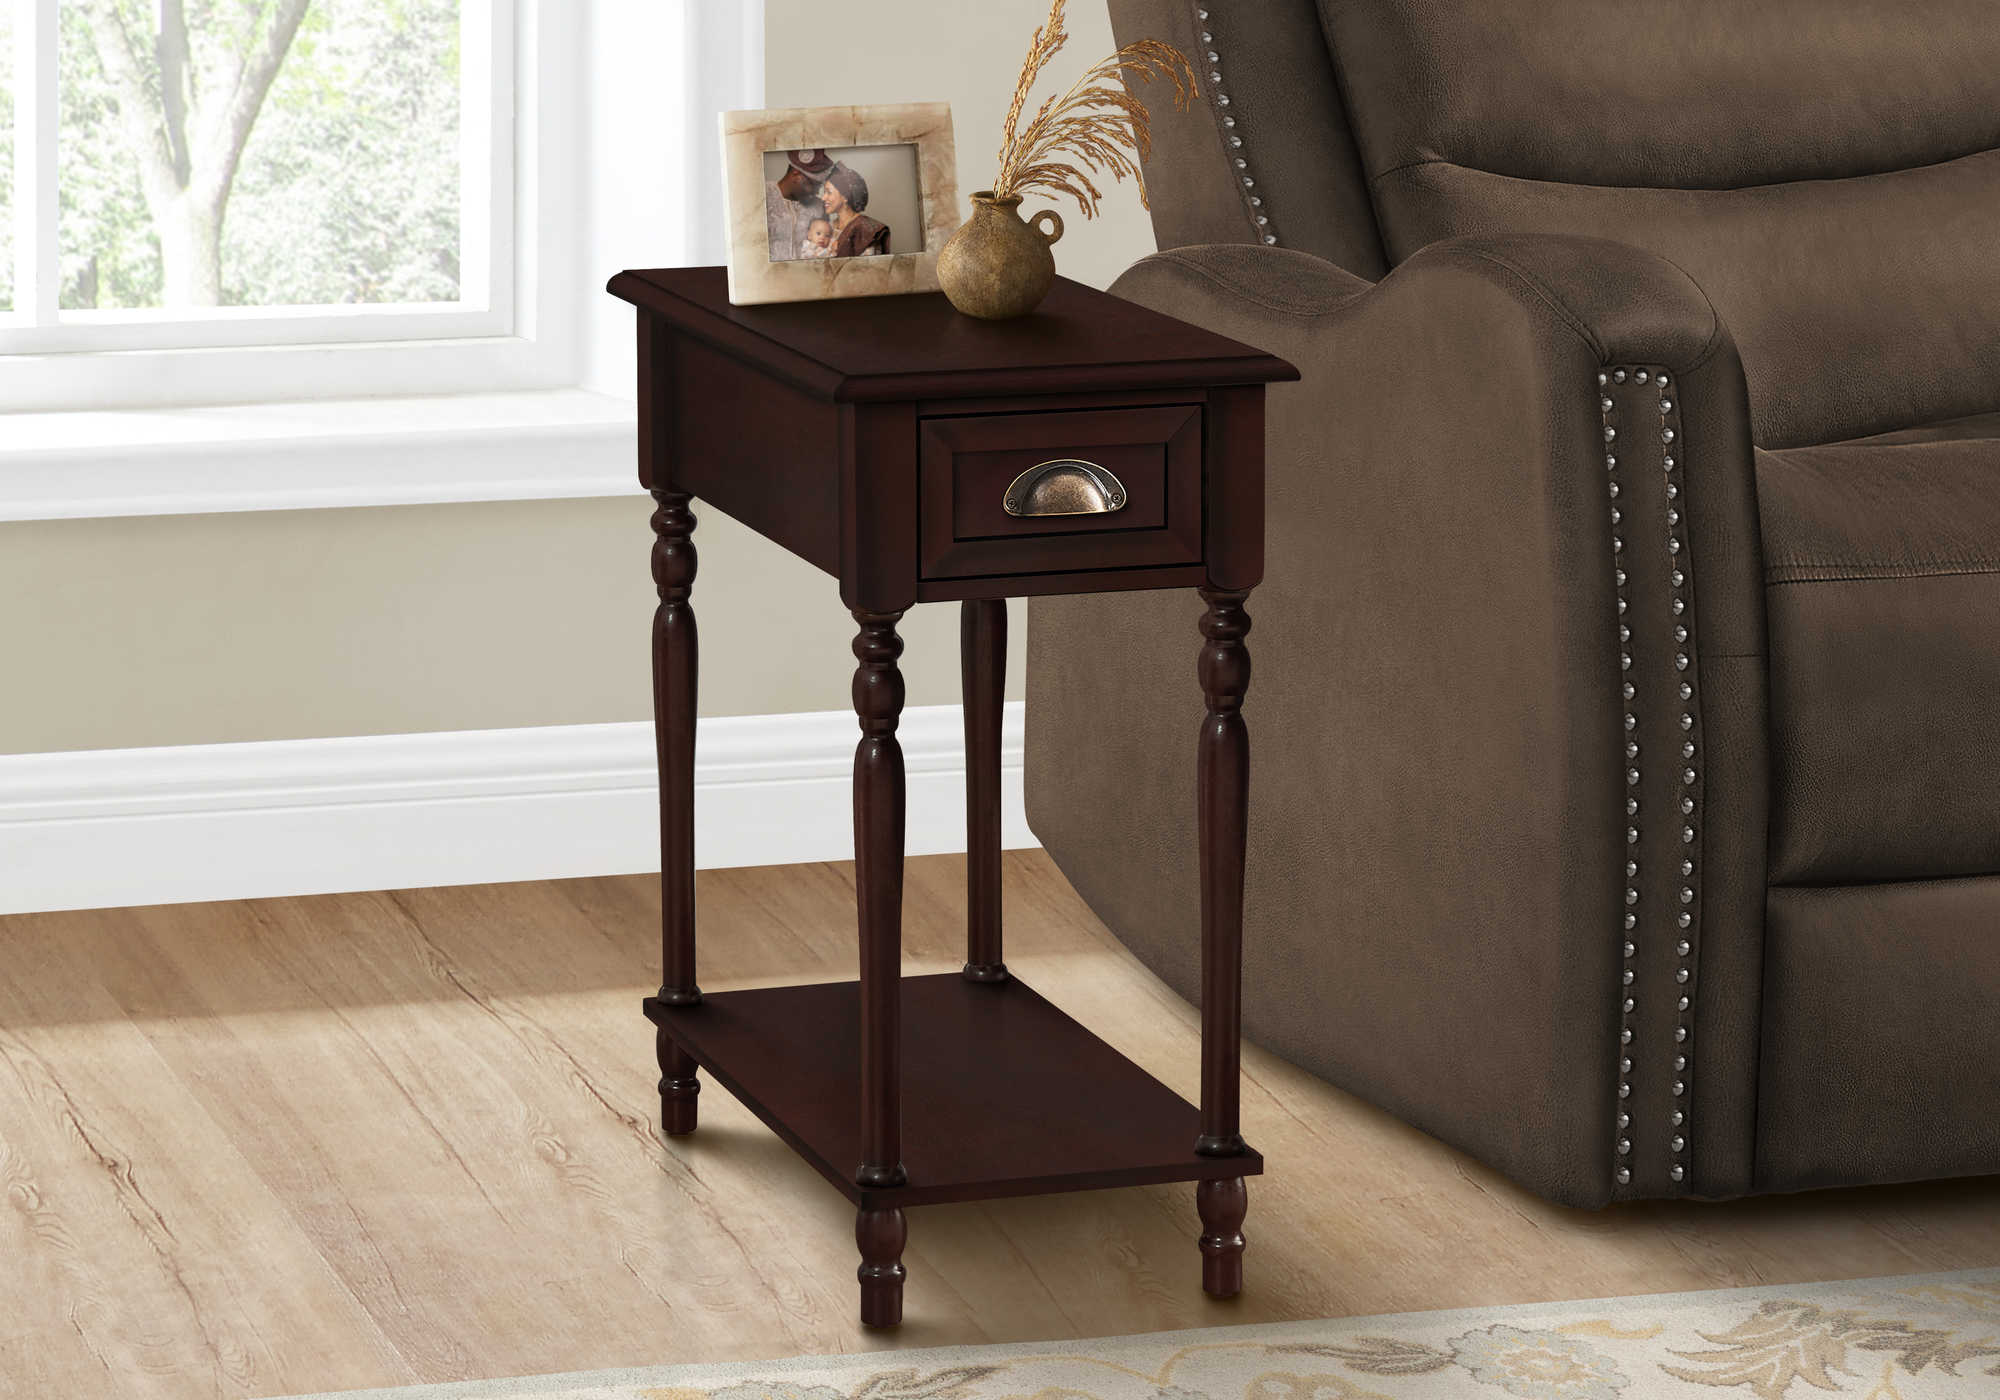 ACCENT TABLE - 24"H / CHERRY VENEER END TABLE